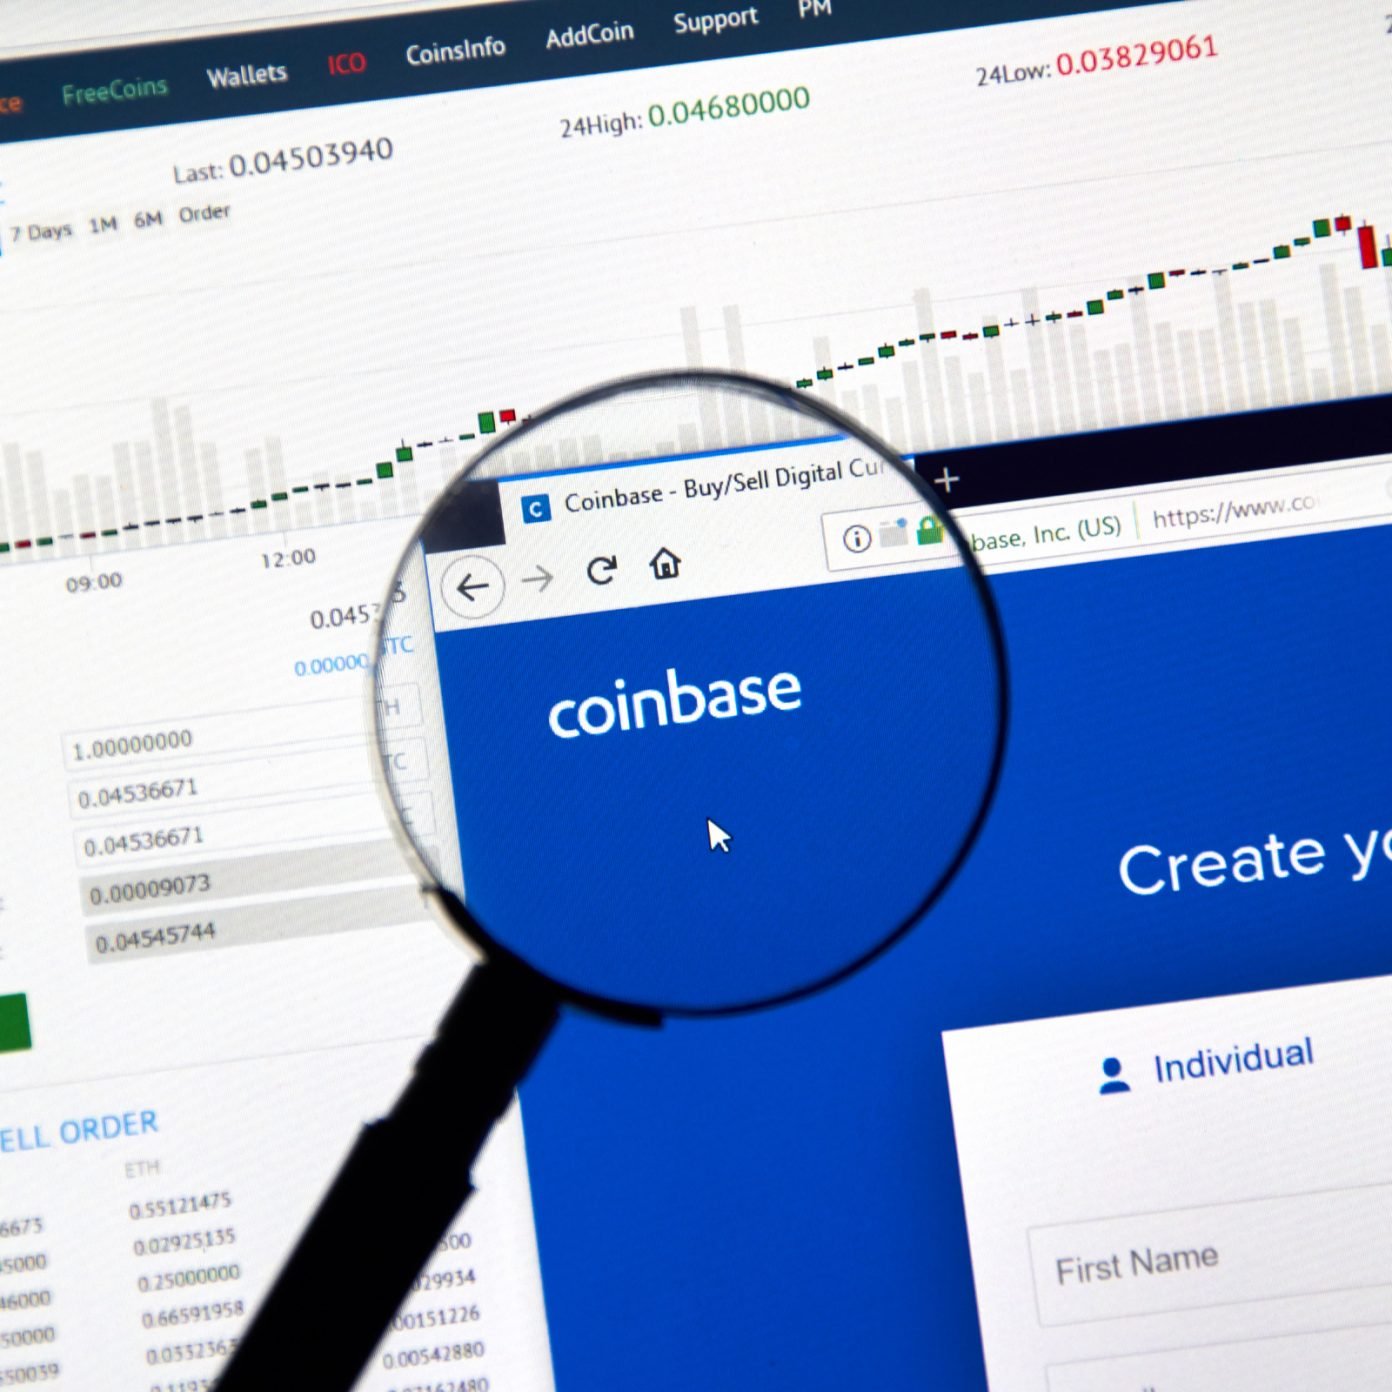 The Daily Coinbase Increases Trading Limits, ABCC Opens in Malta, Omniex Hires Former